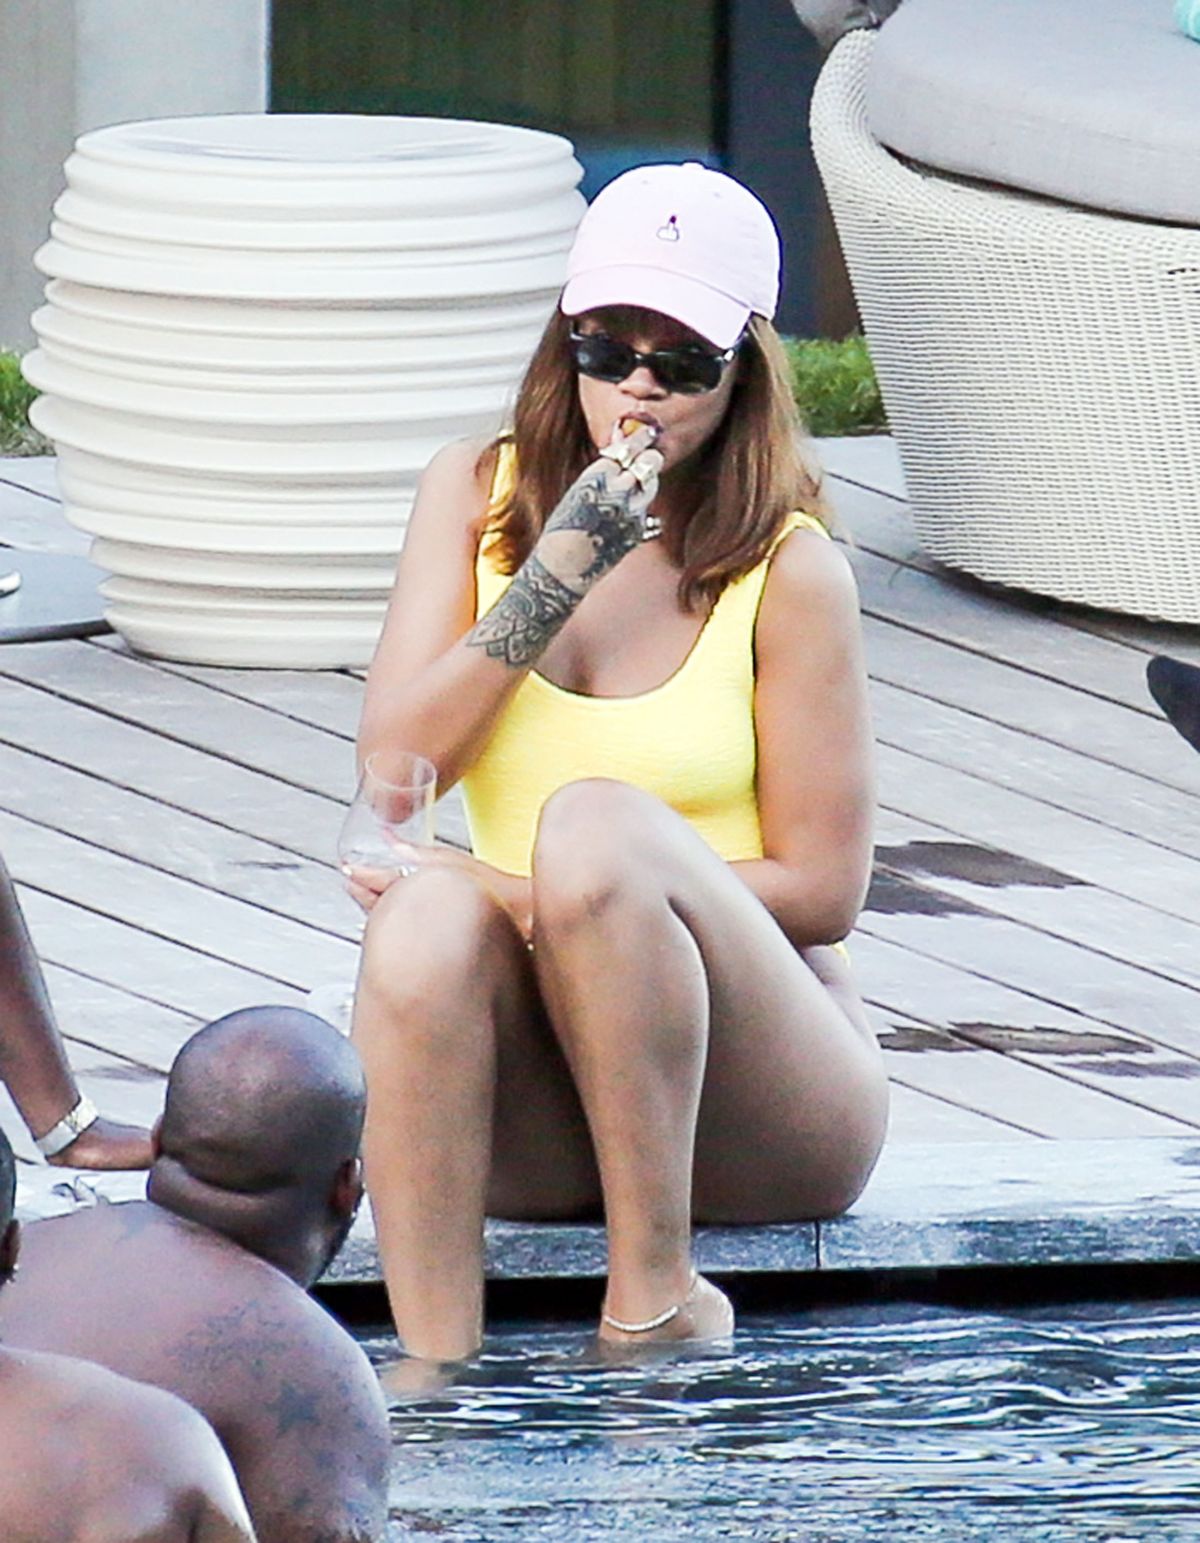 rihanna-in-swimsuit-at-pool-at-her-hotel-in-zurich-08-13-2016_10.jpg